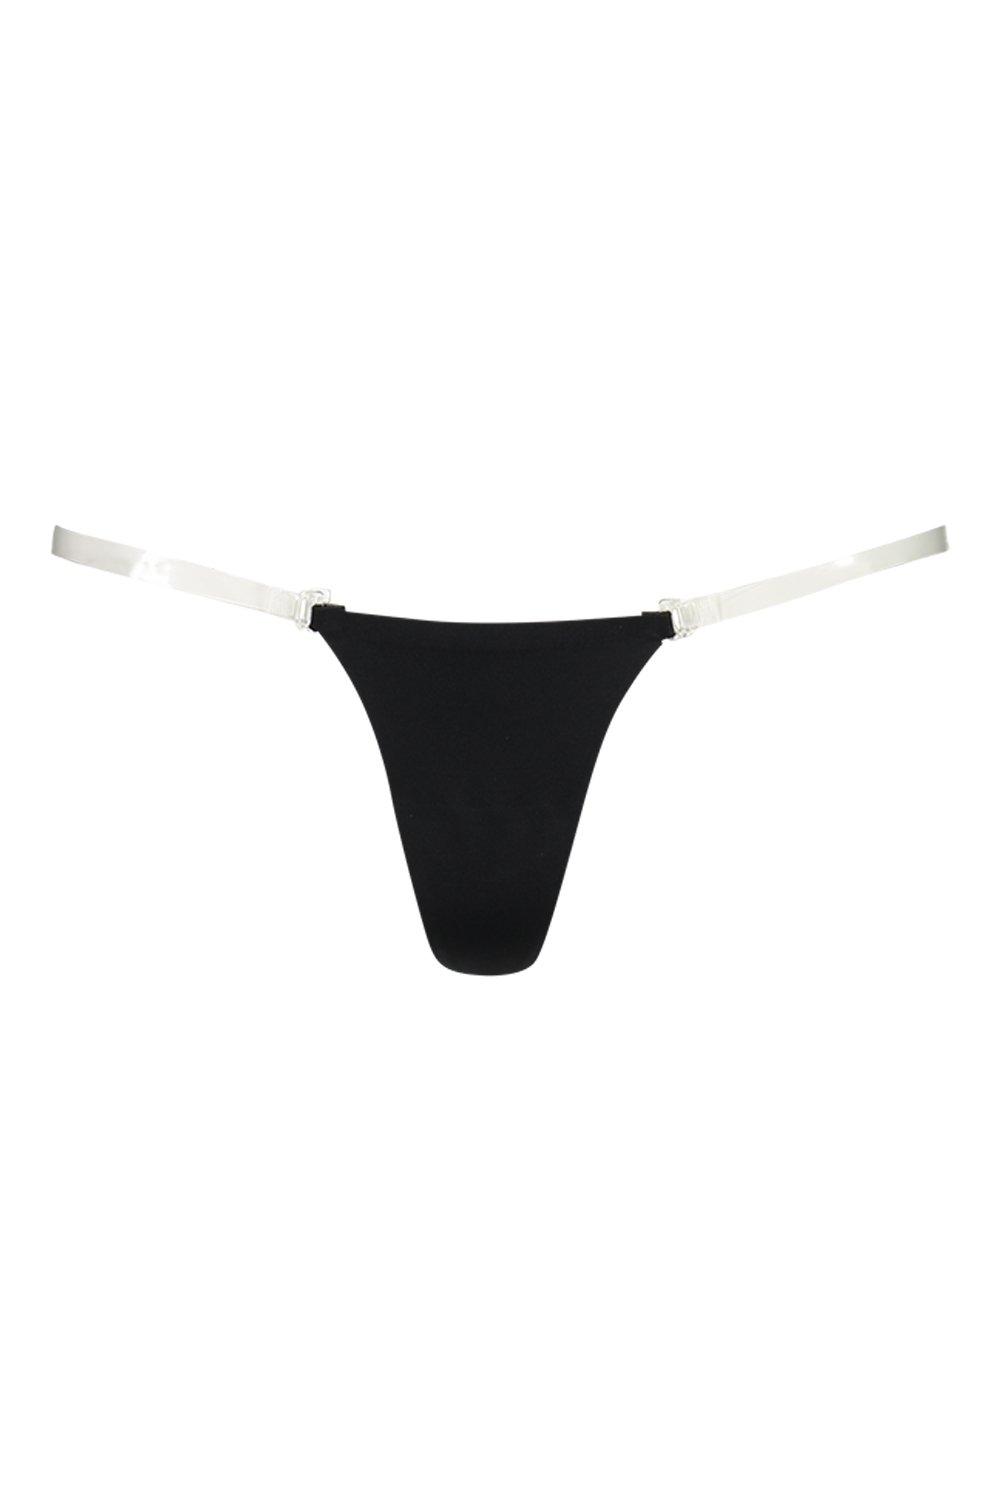 C string thong panty Strapless, clear Straps thong panty and double tape